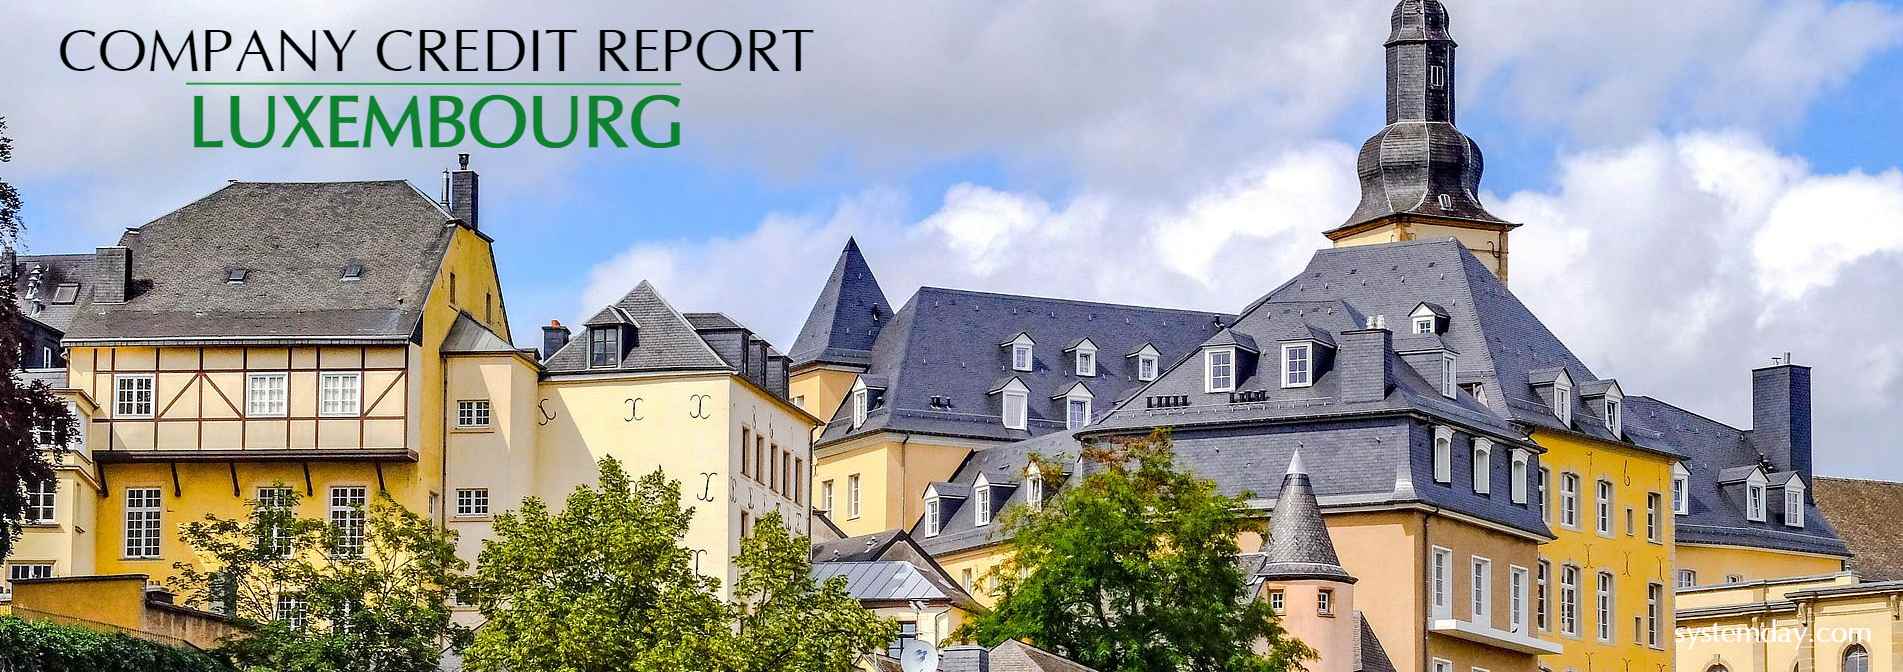 Luxembourg Company Credit Report